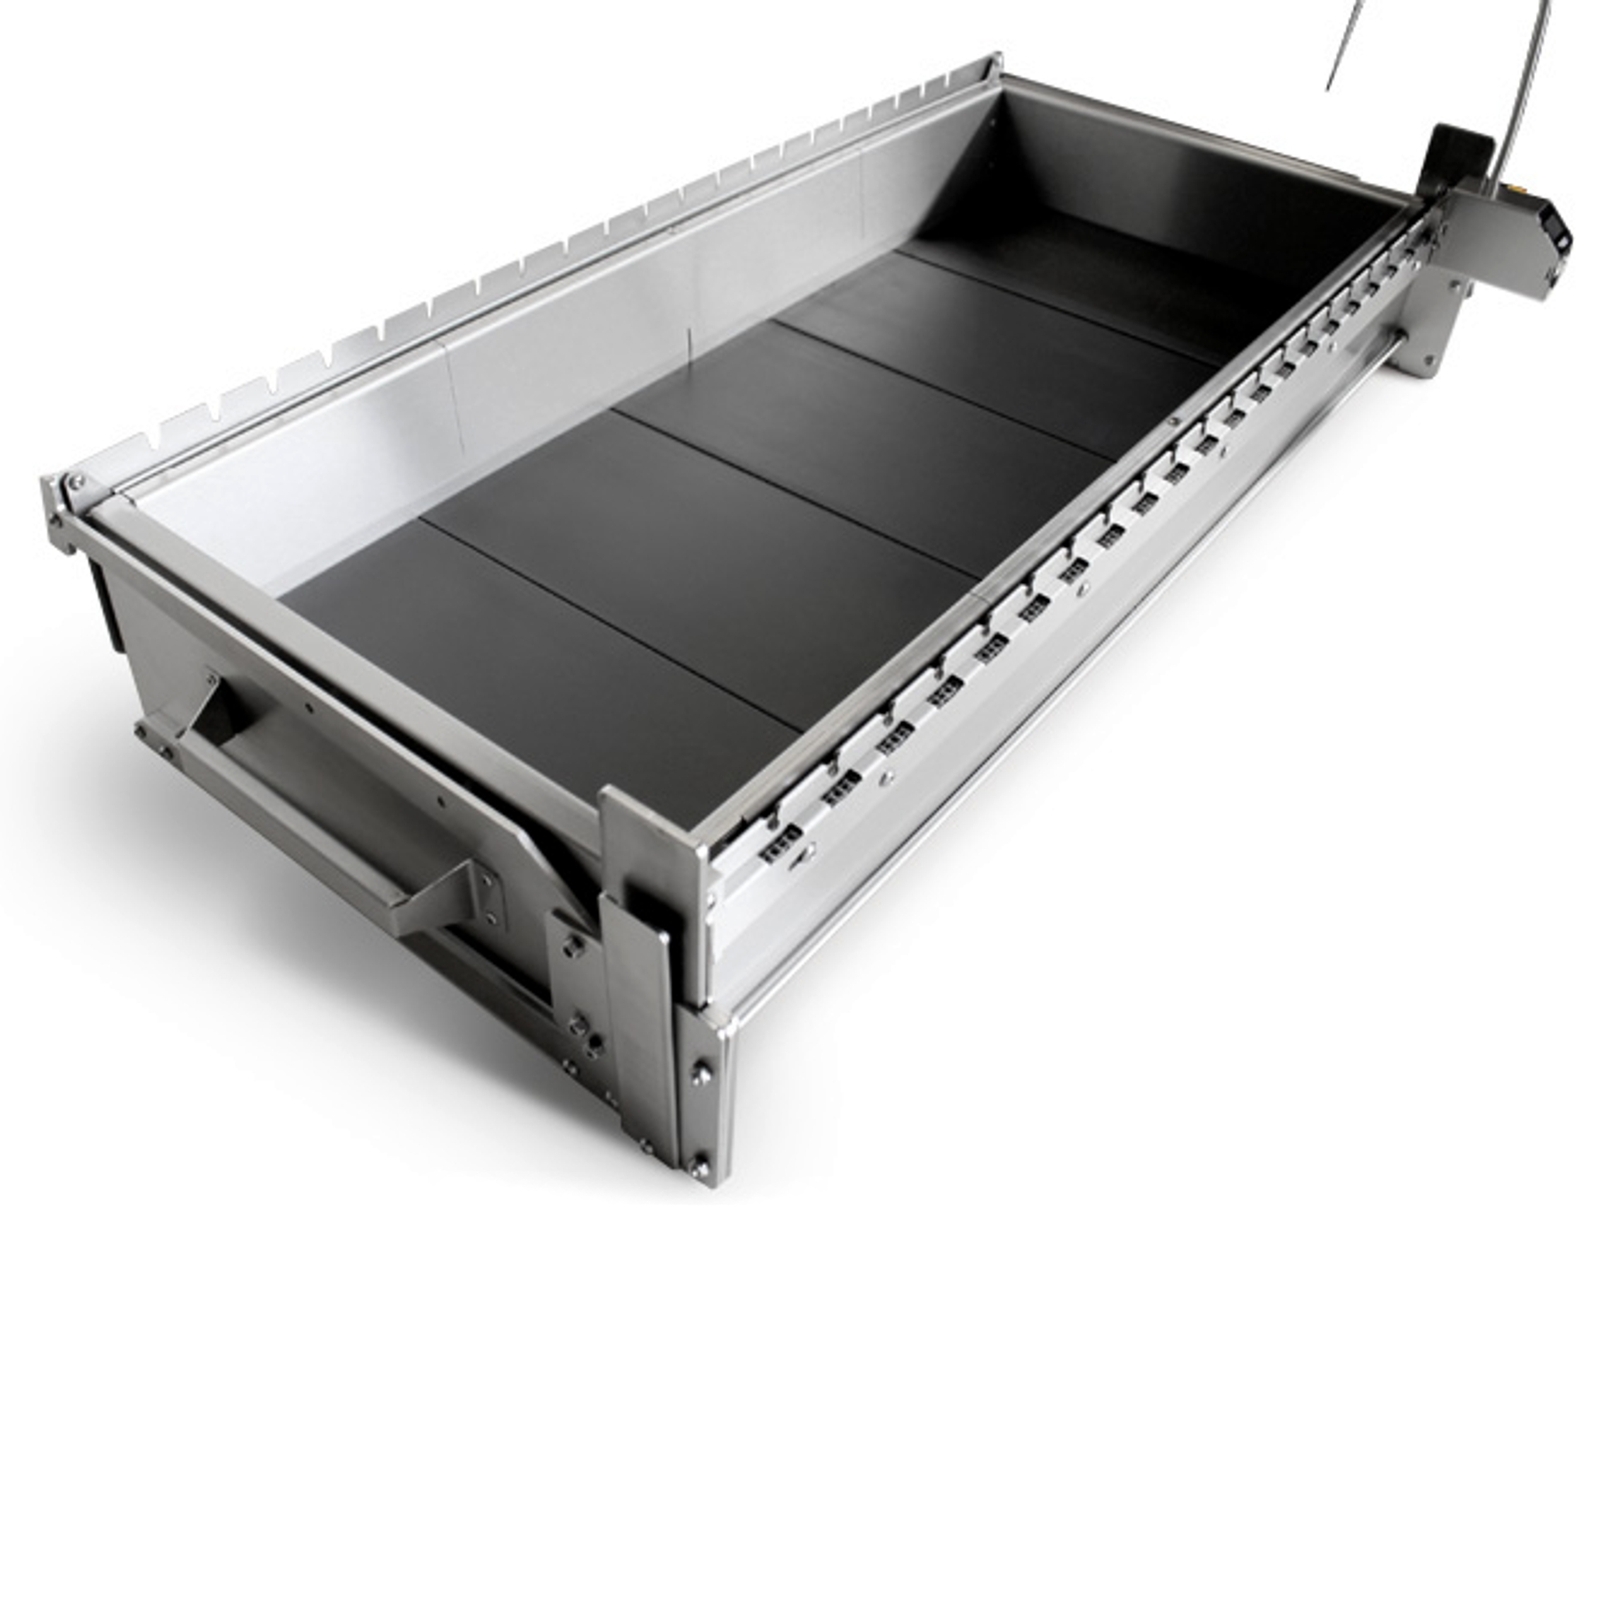 myGRILL Chef SMART Large with Stainless Steel Cart & Big Spit - Ultimate Package - CS3015-15-PLUS-BIGSPIT